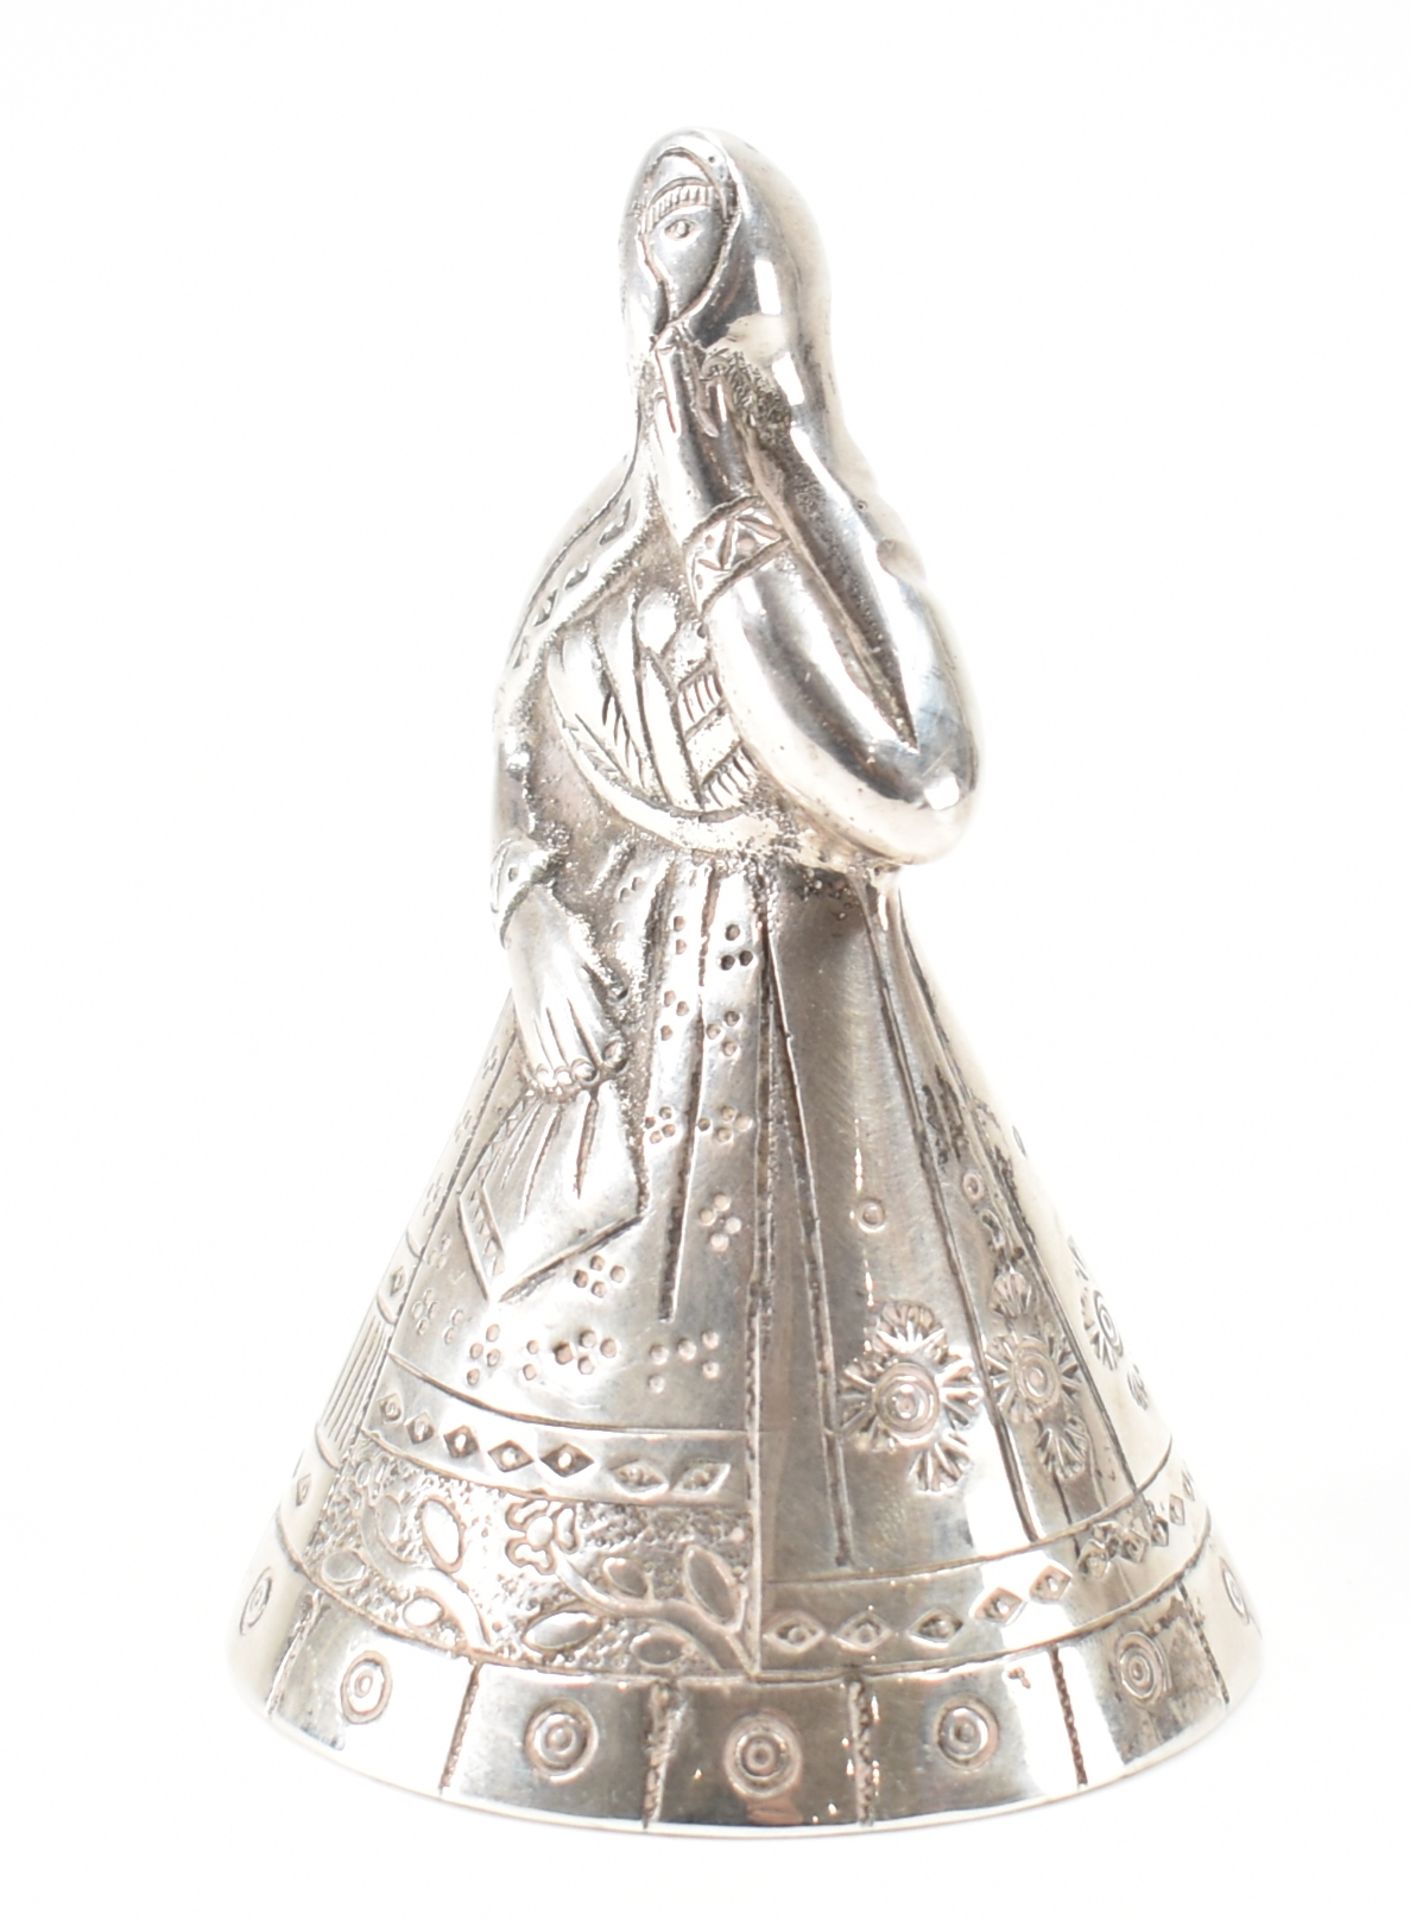 SILVER EASTERN EUROPEAN TABLE BELL - Image 3 of 5